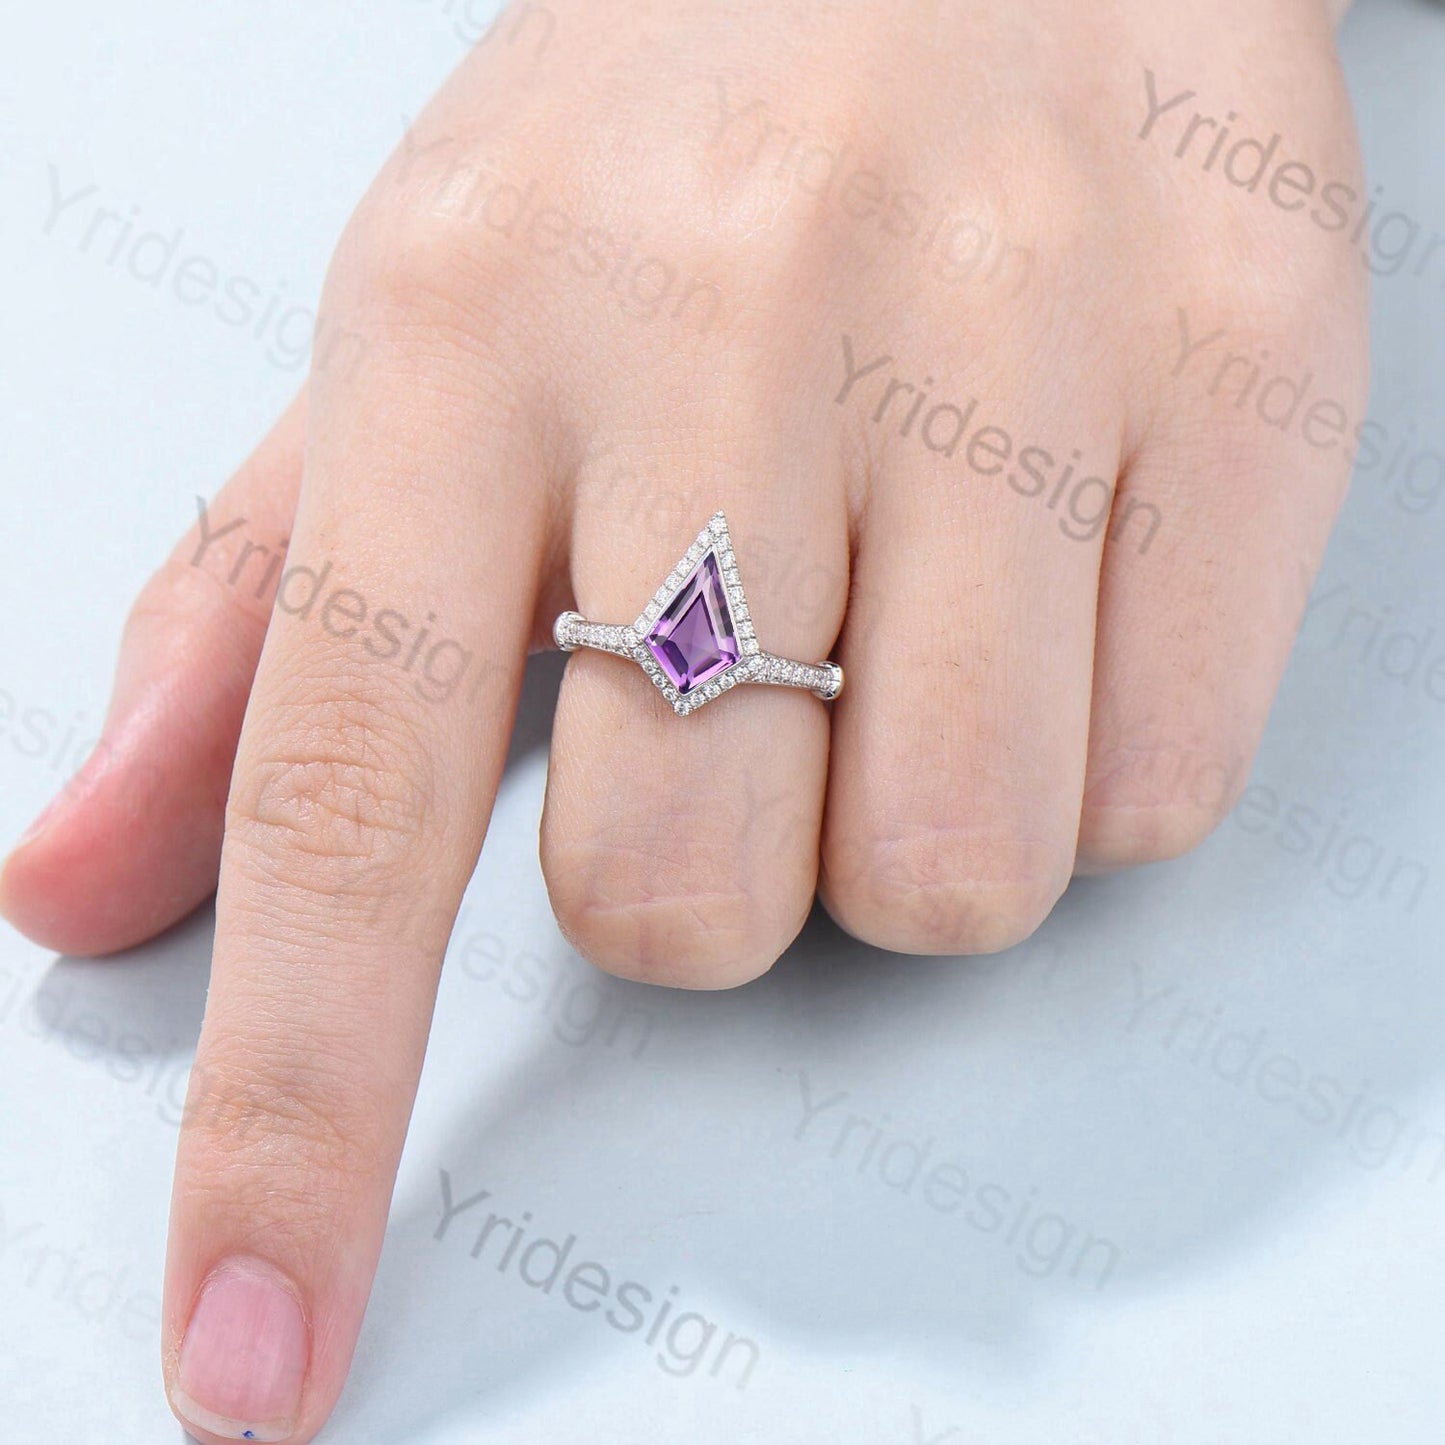 Kite shaped amethyst engagement ring Antique halo moissanite diamond wedding ring for women Vintage Style Unique Bridal Ring Solid 14K Gold - PENFINE